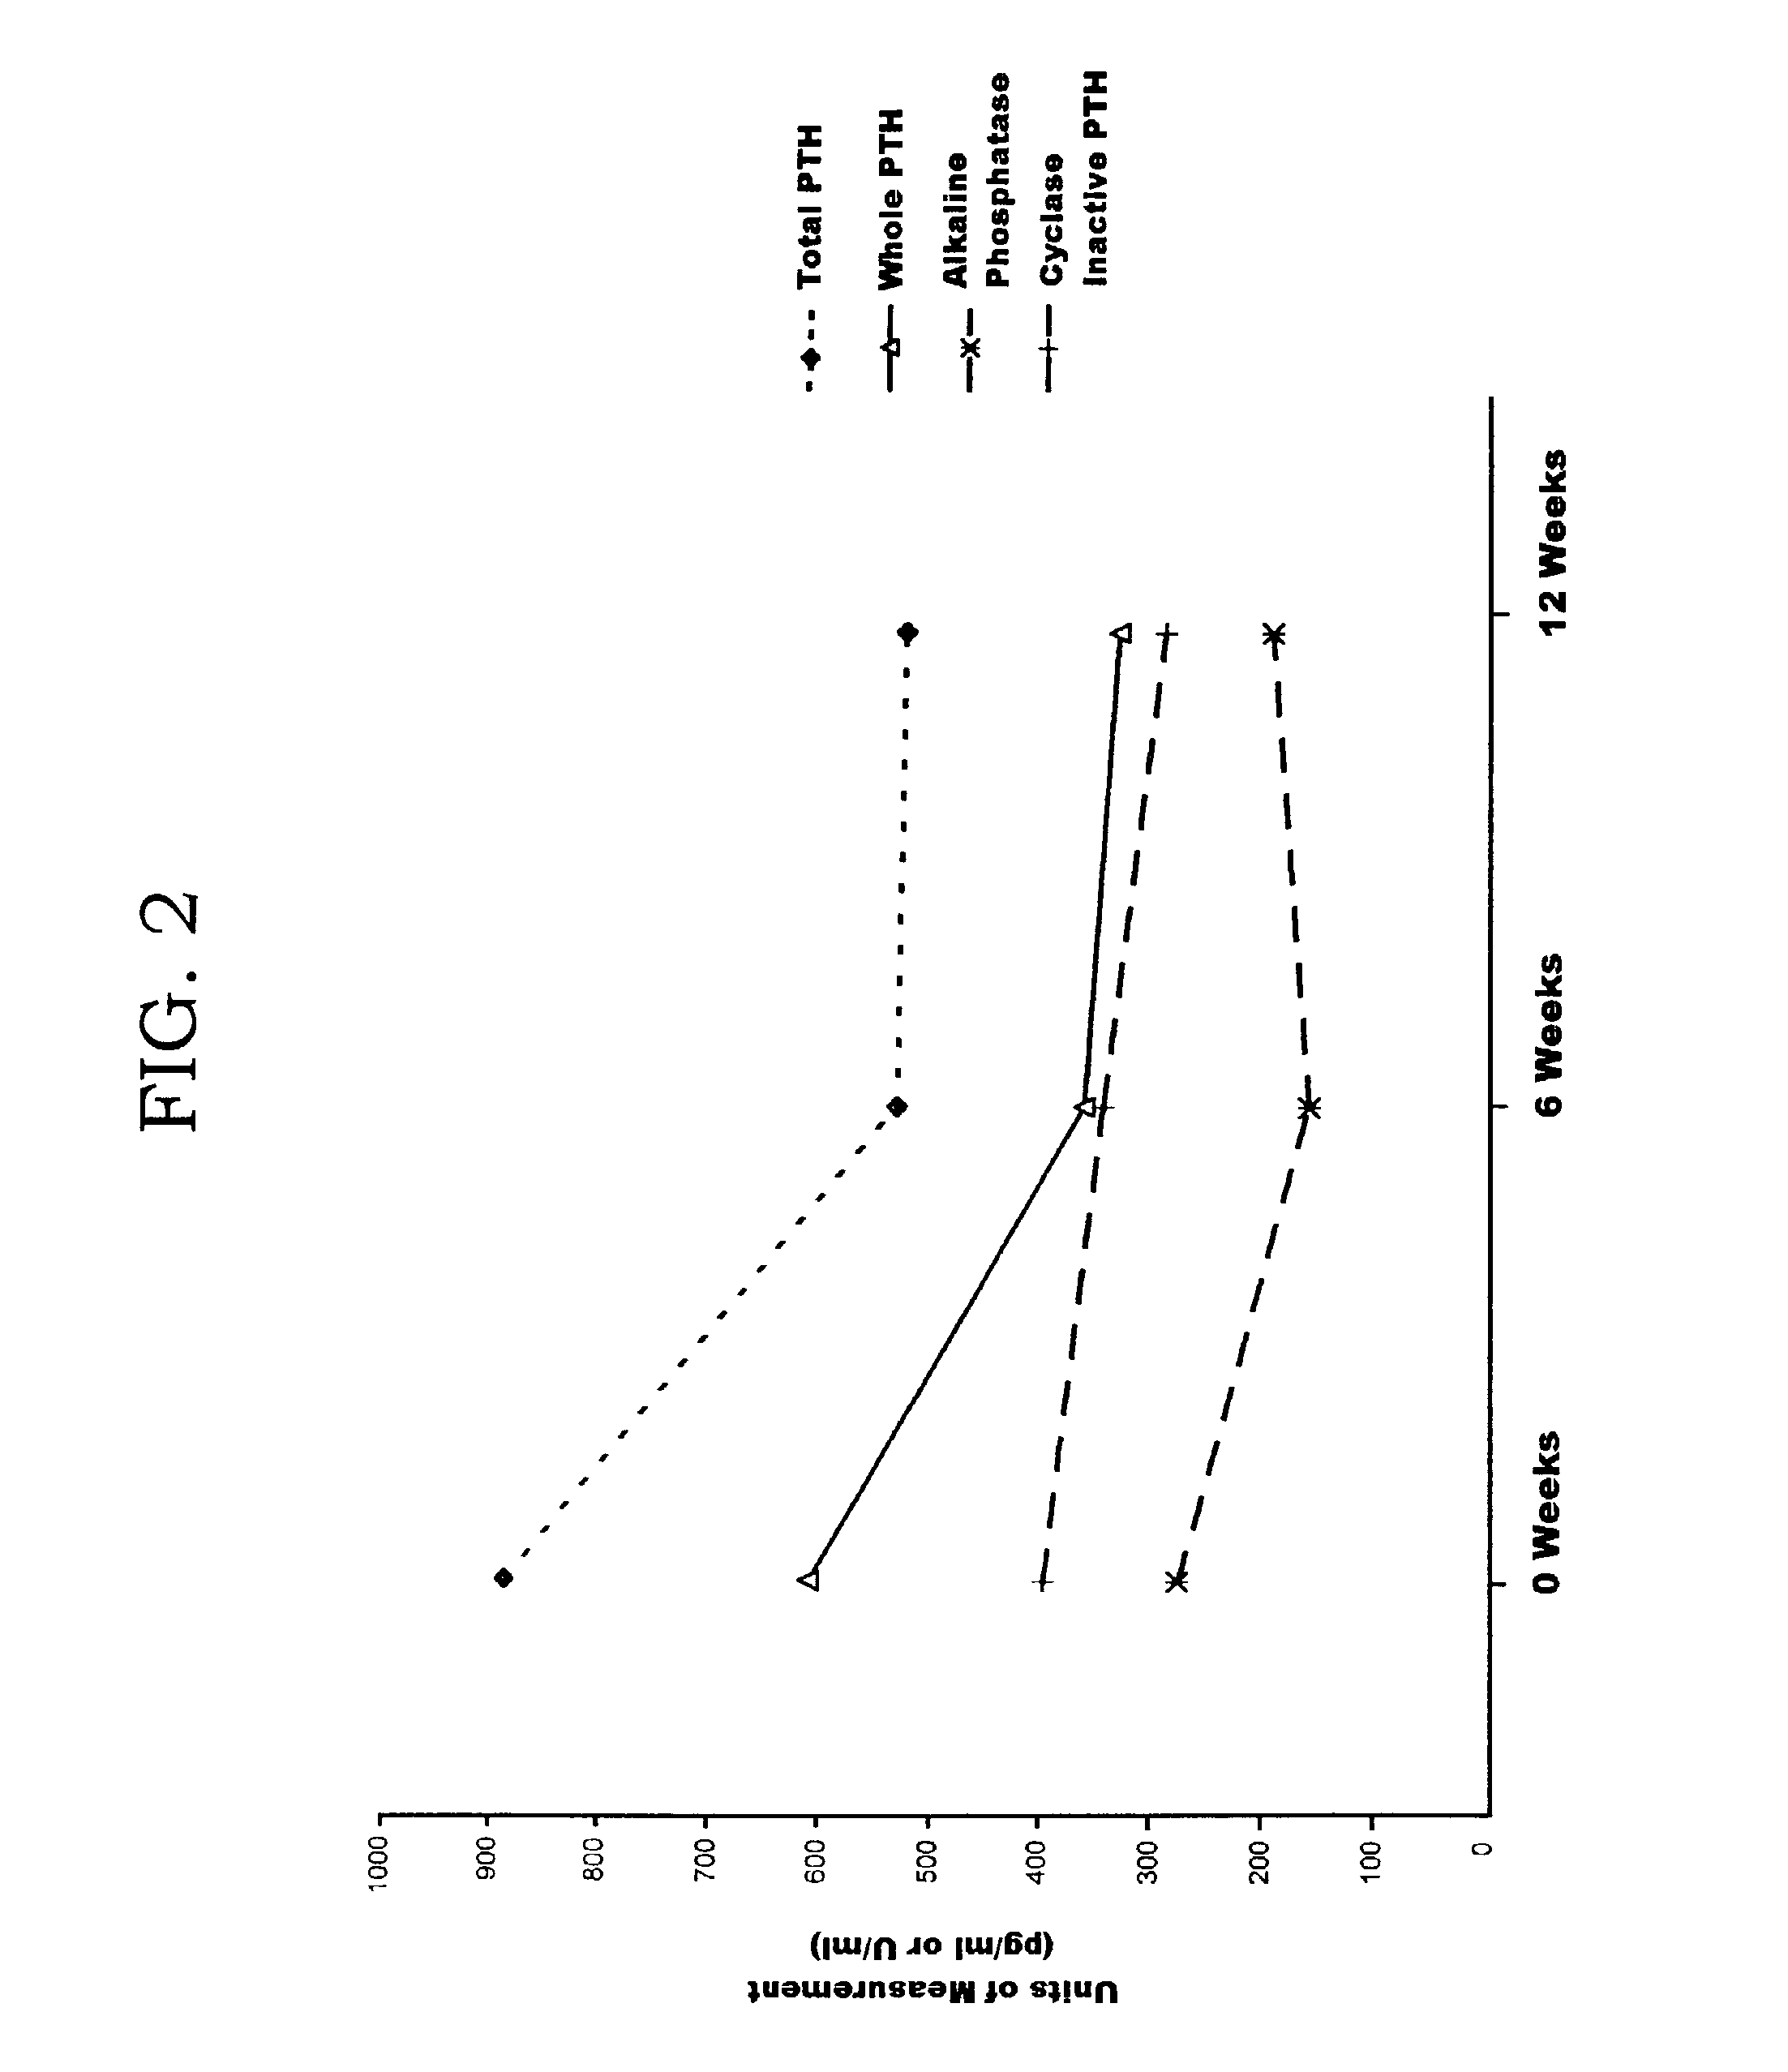 Methods for monitoring and guiding therapeutic suppression of parathyroid hormone in renal patients having secondary hyperparathyroidism